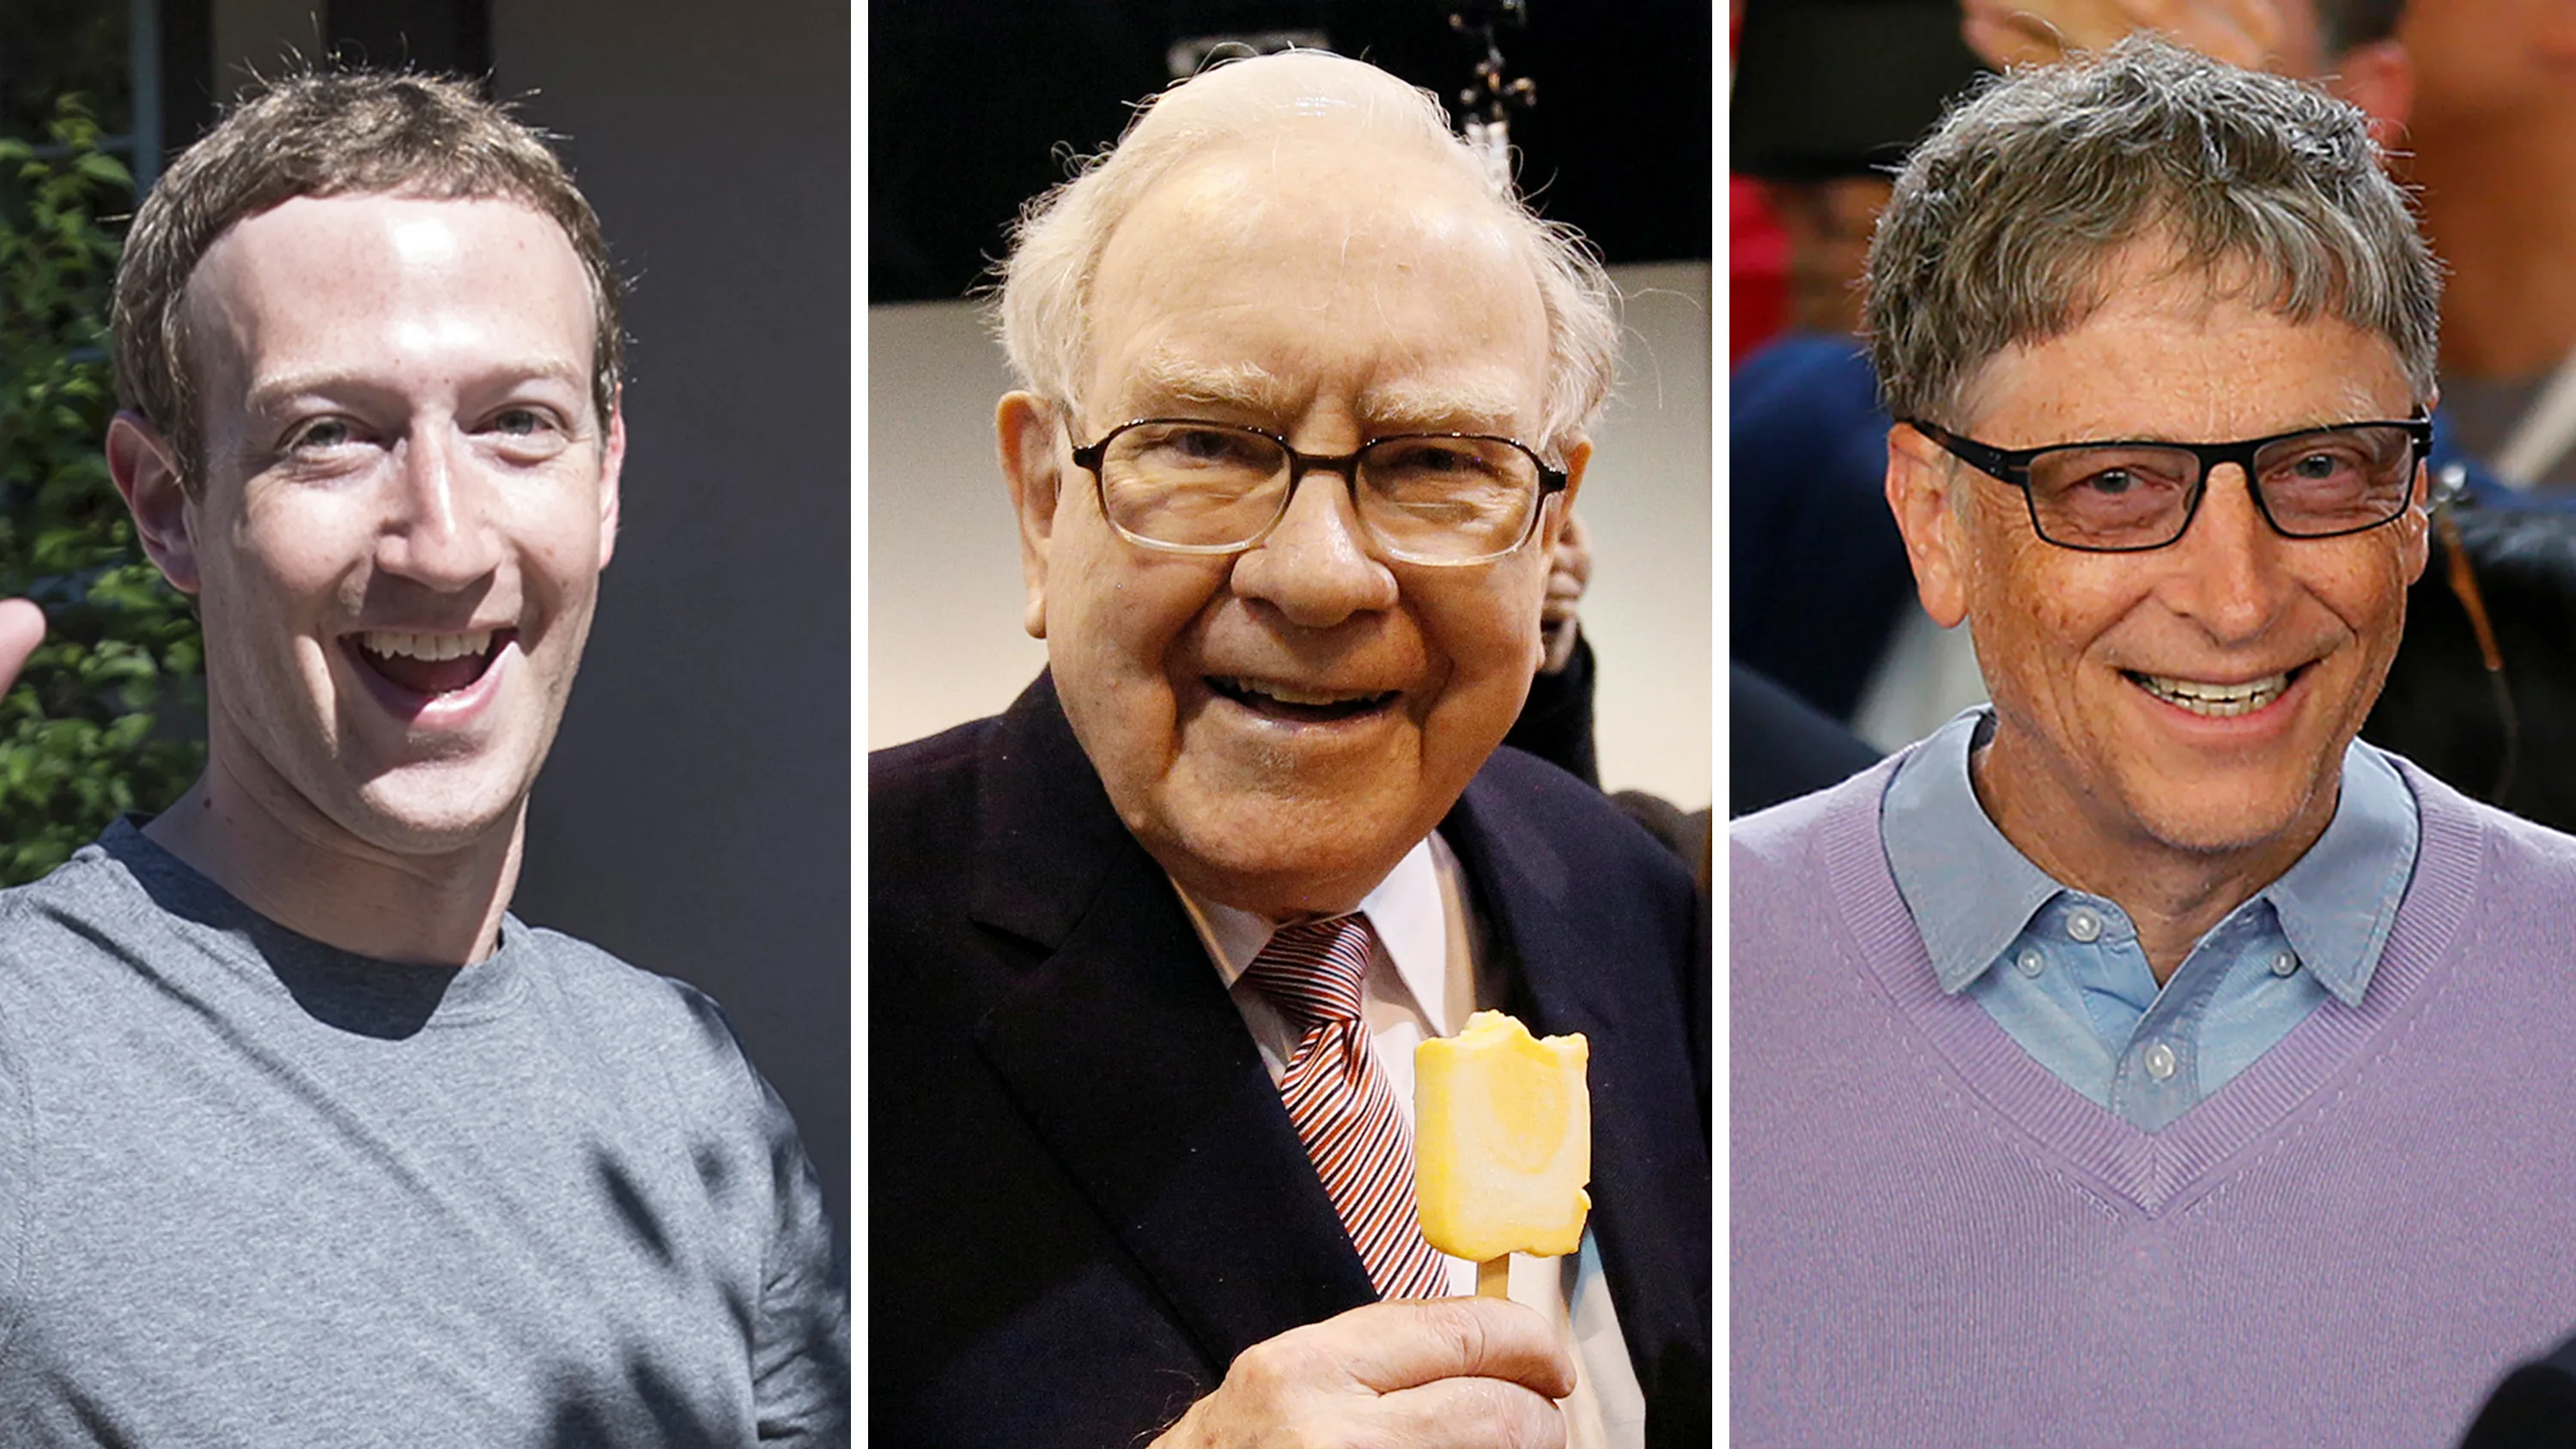 What cars do the world's top 10 billionaires drive?